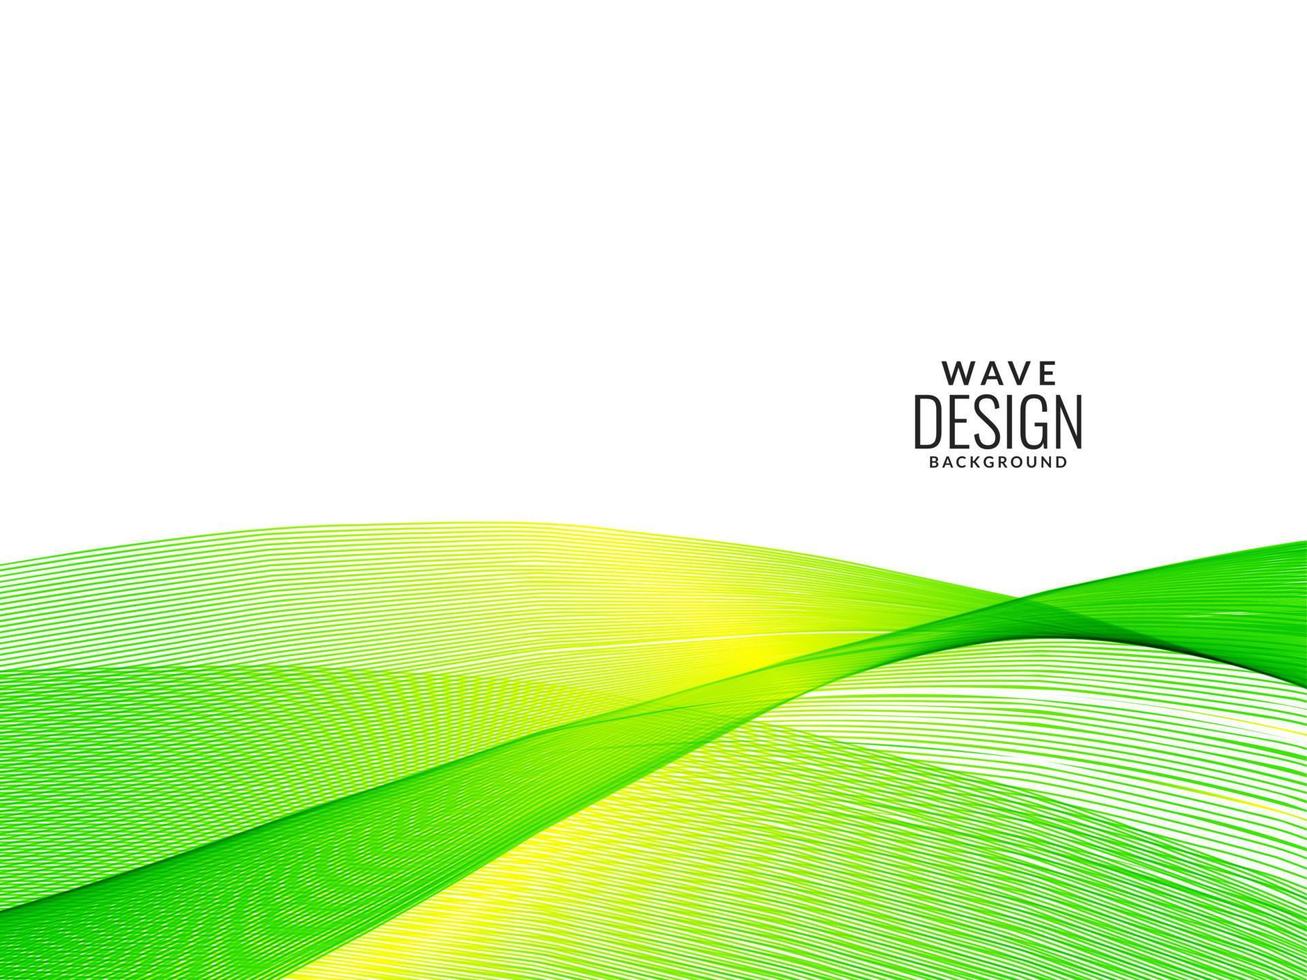 Green flowing stylish wave in white background illustration pattern vector